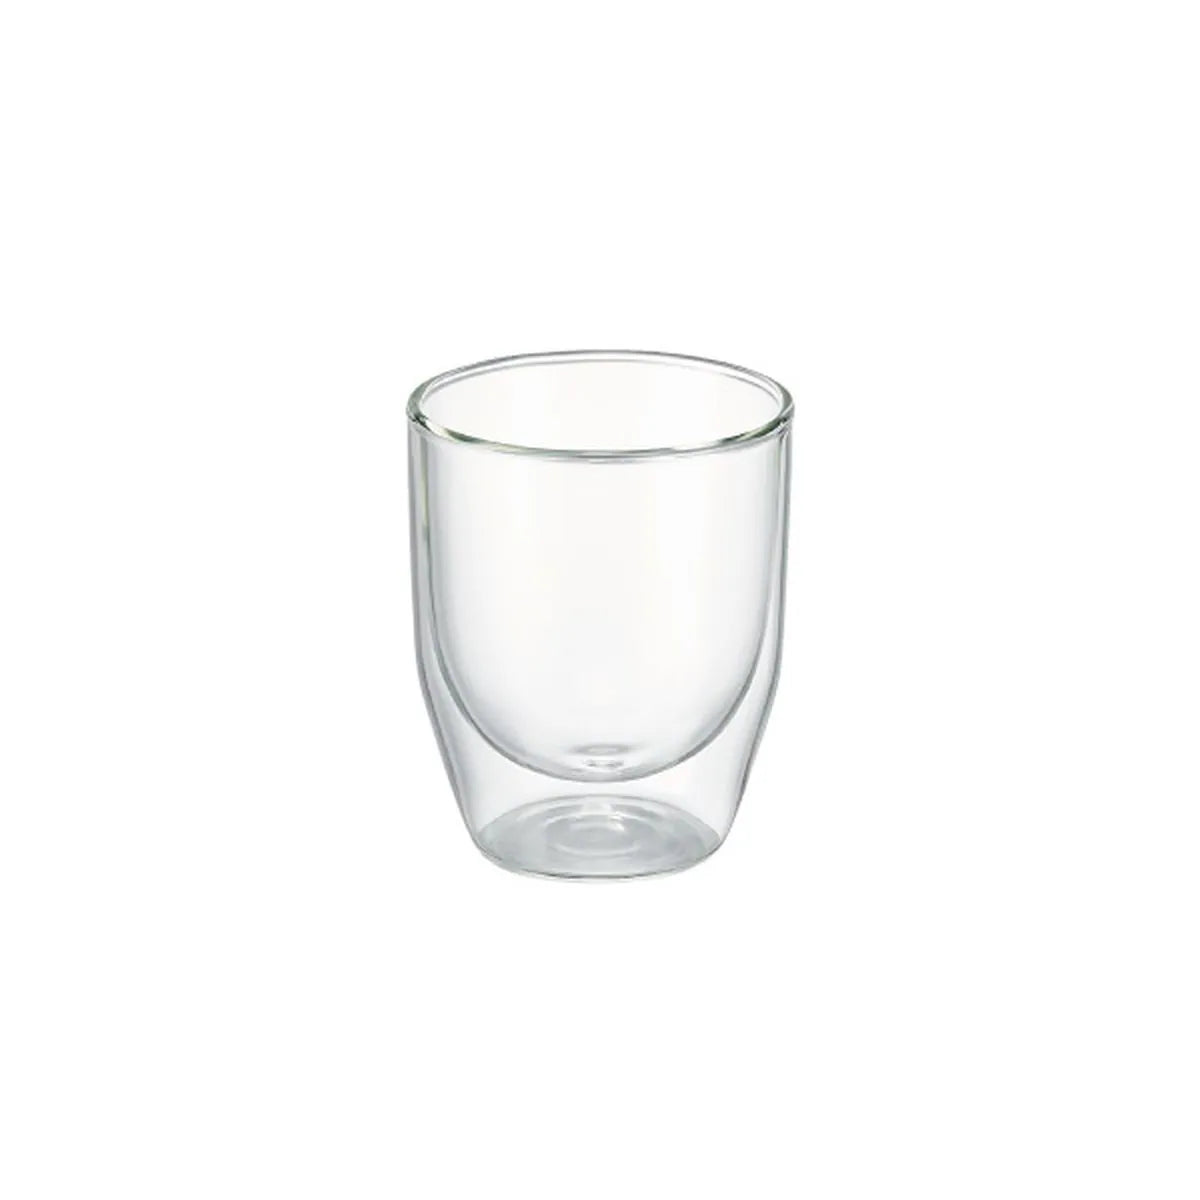 récolte Solo Kaffe - Double Wall Glass Cup Solo 咖啡機 - 雙層玻璃咖啡杯